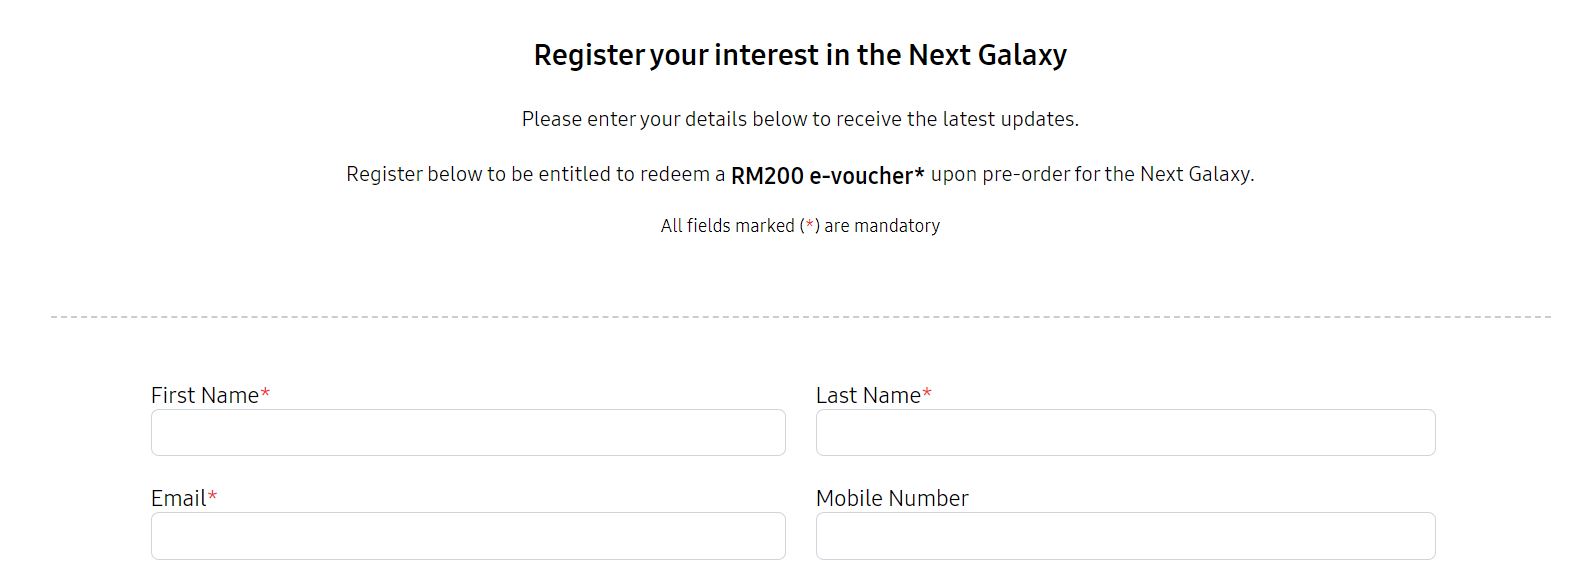 Galaxy Unpacked 2023 RM200 Registration of Interest 1